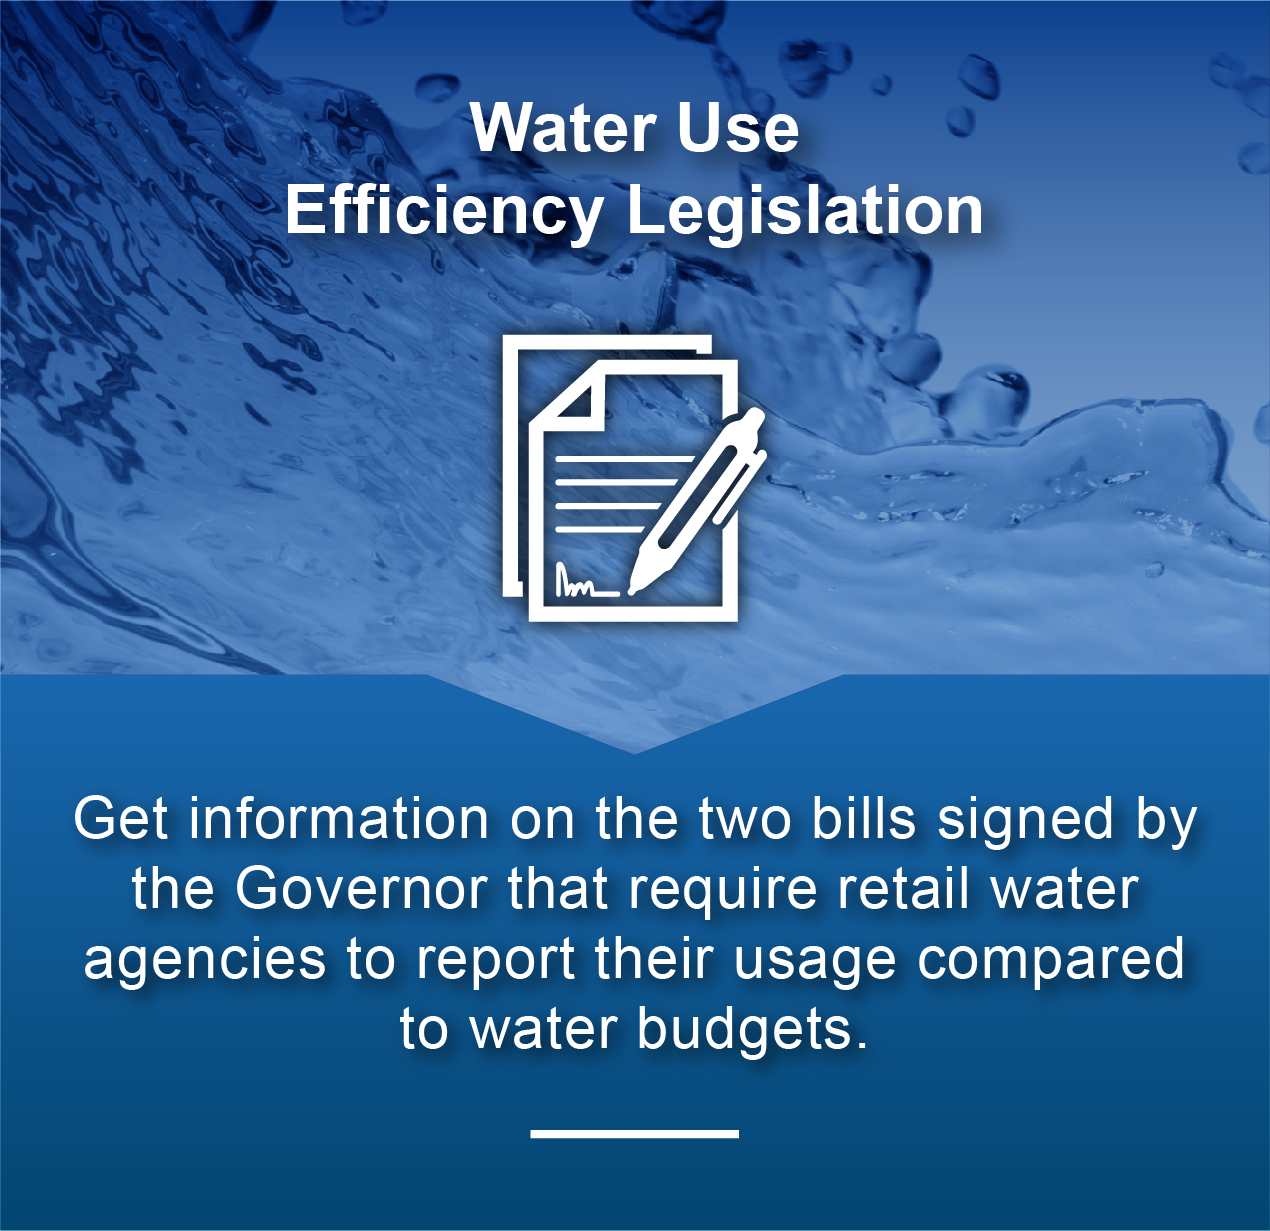 Water Use Efficiency Legislation - Get information in the two bills signed by the Governor that require retail water agencies to report their usage compared to water budgets